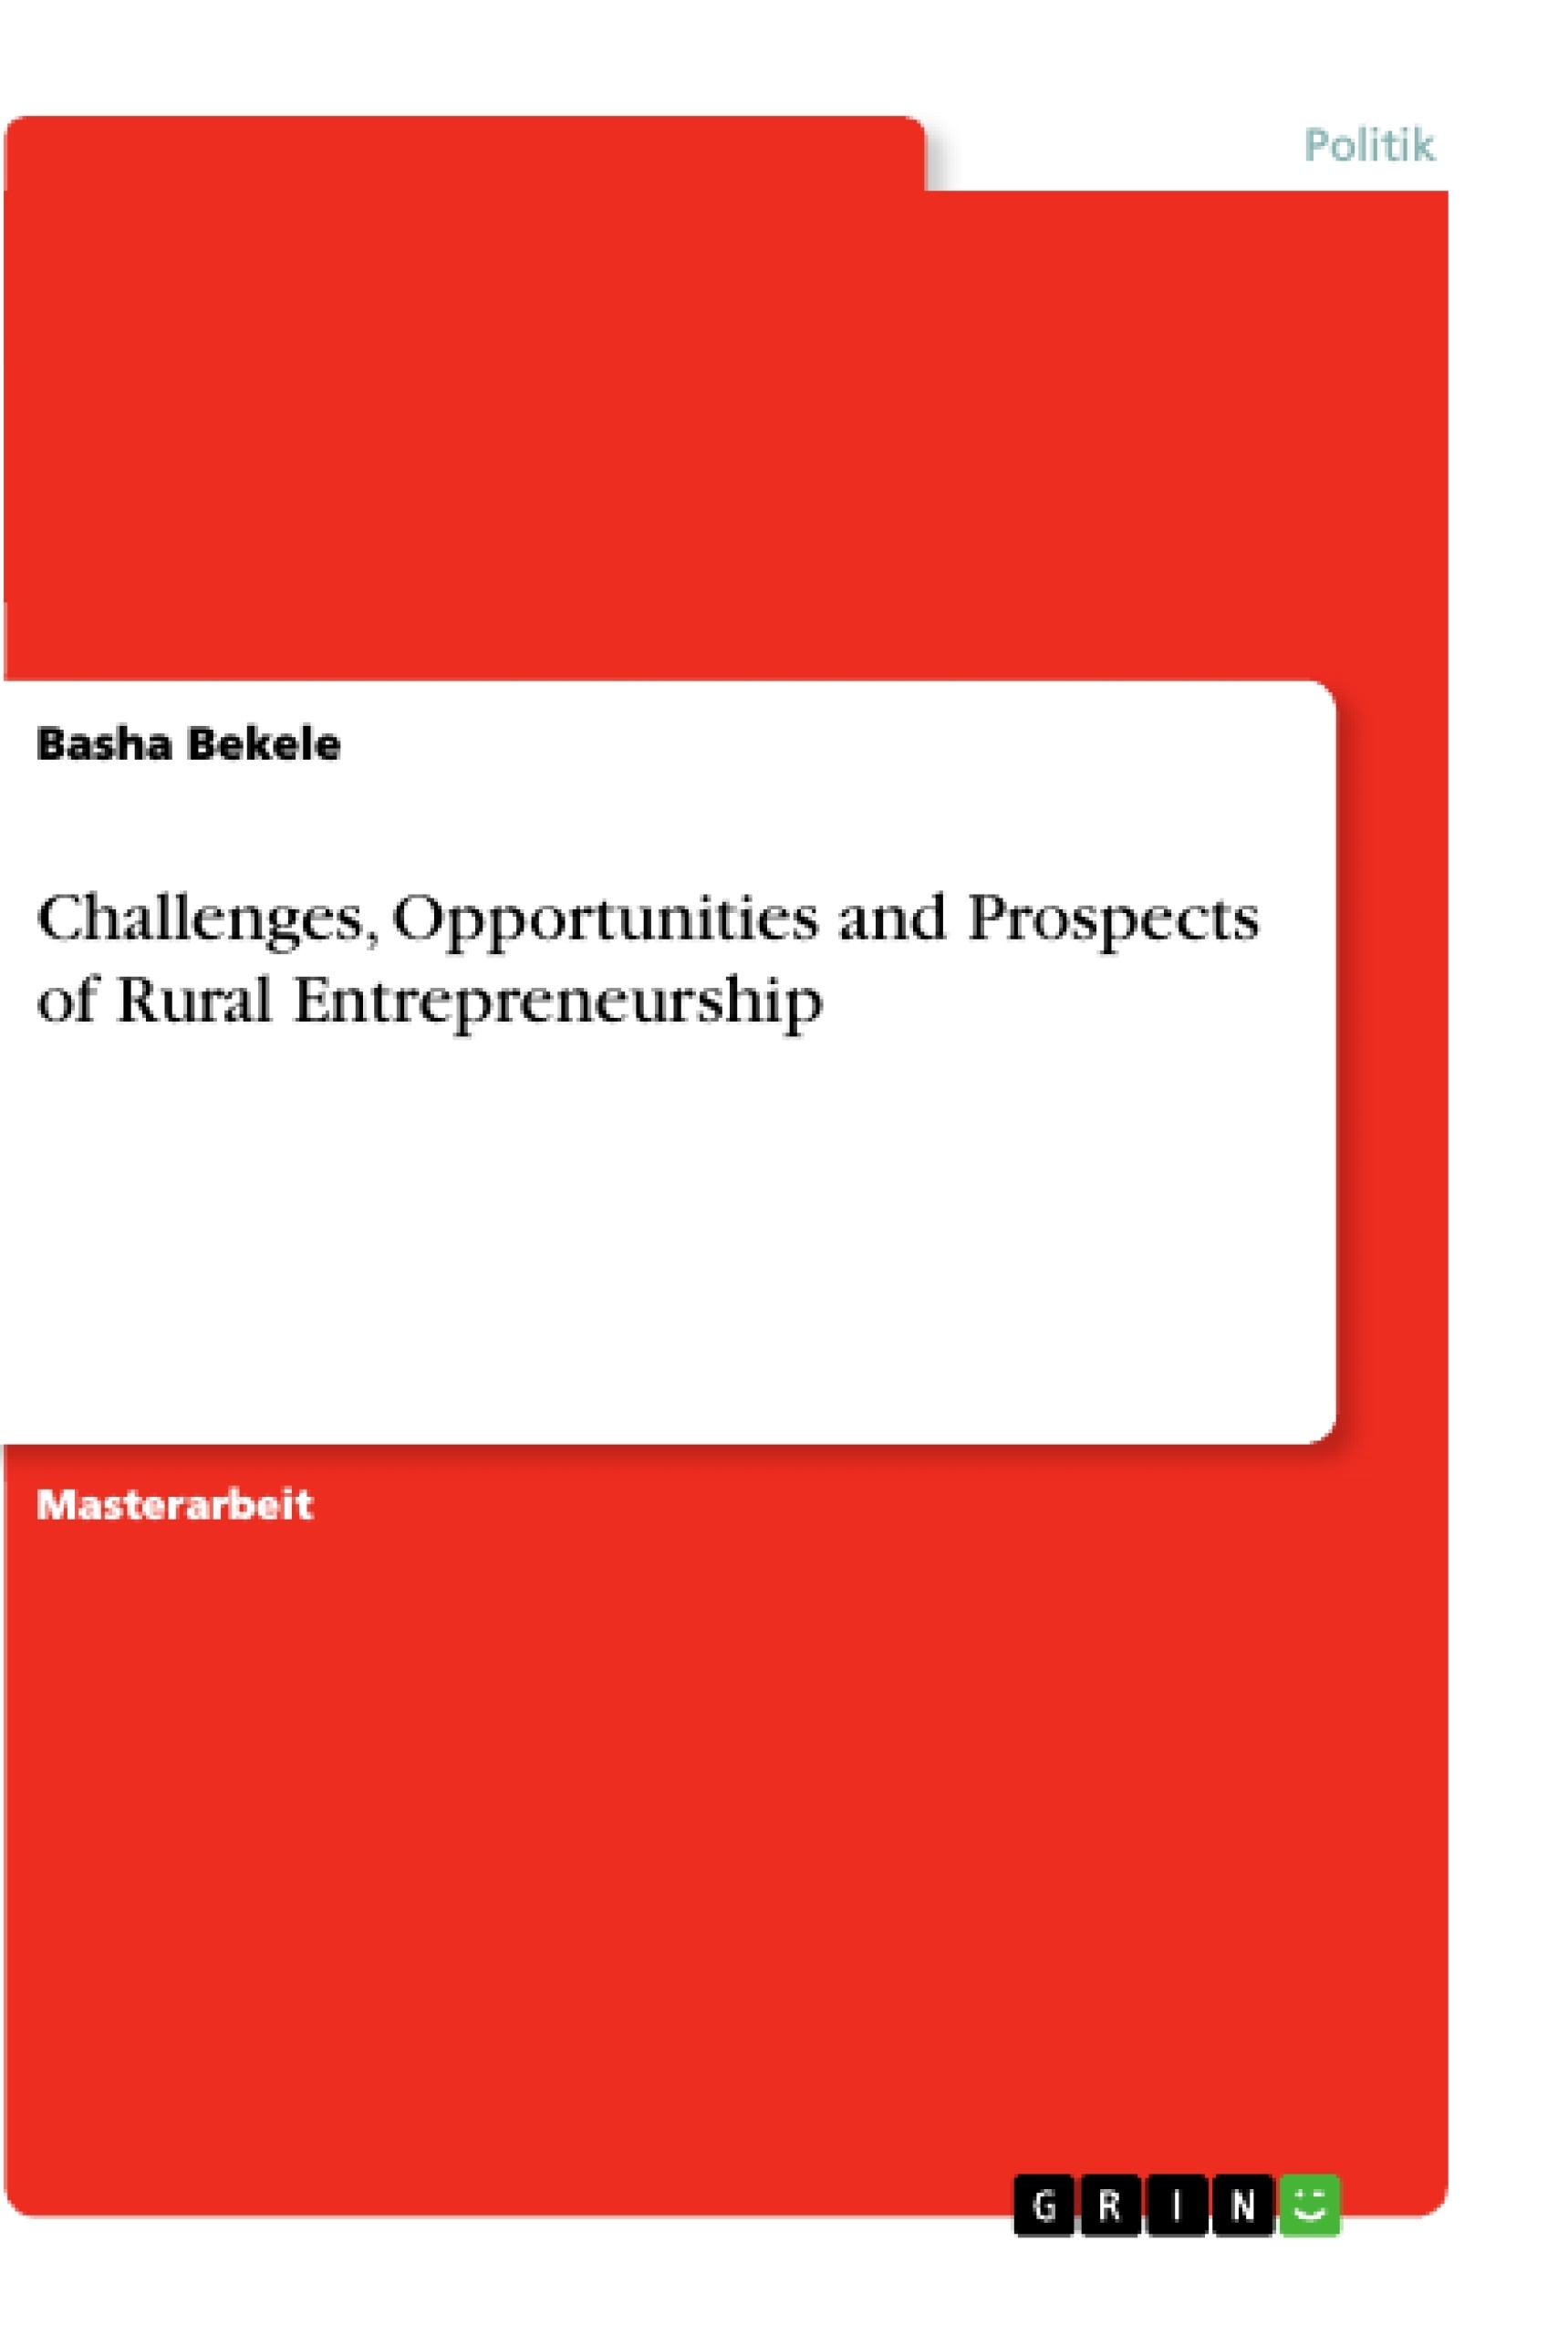 Titel: Challenges, Opportunities and Prospects of Rural Entrepreneurship